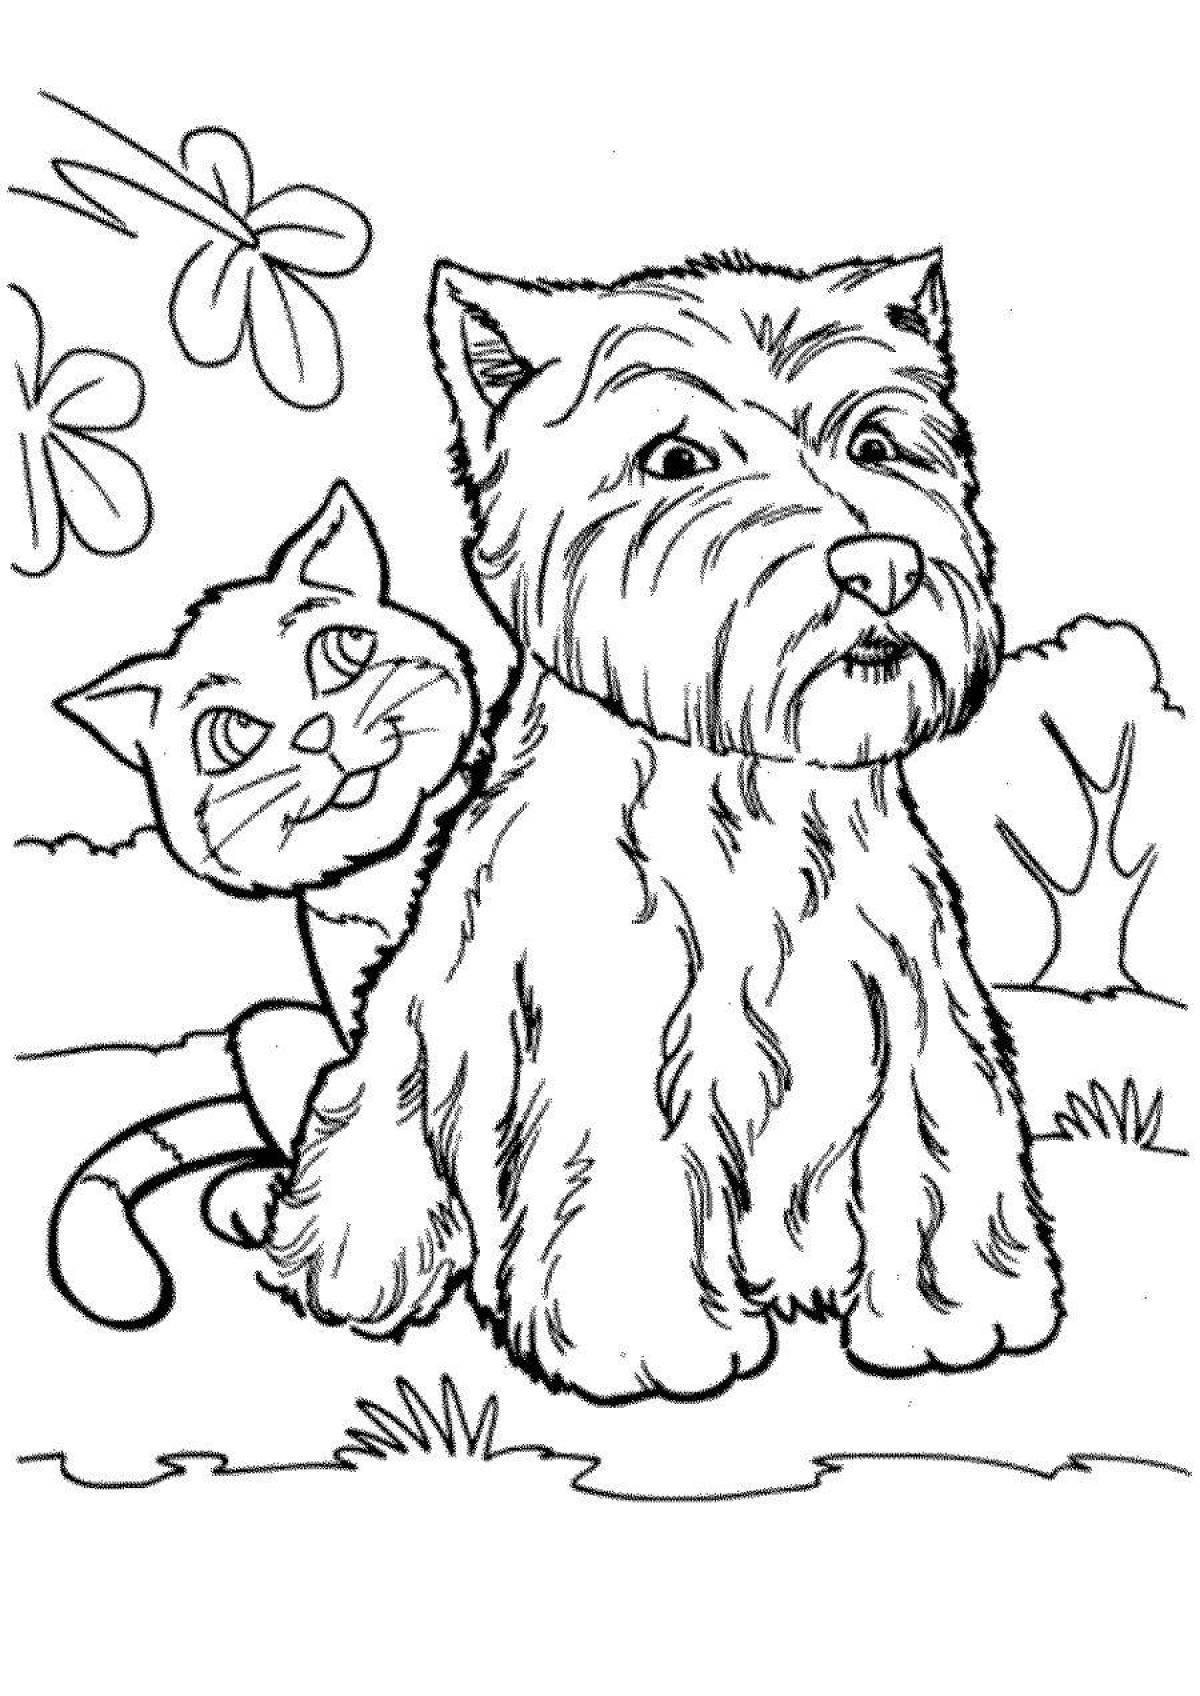 Brilliant dog and cat coloring page